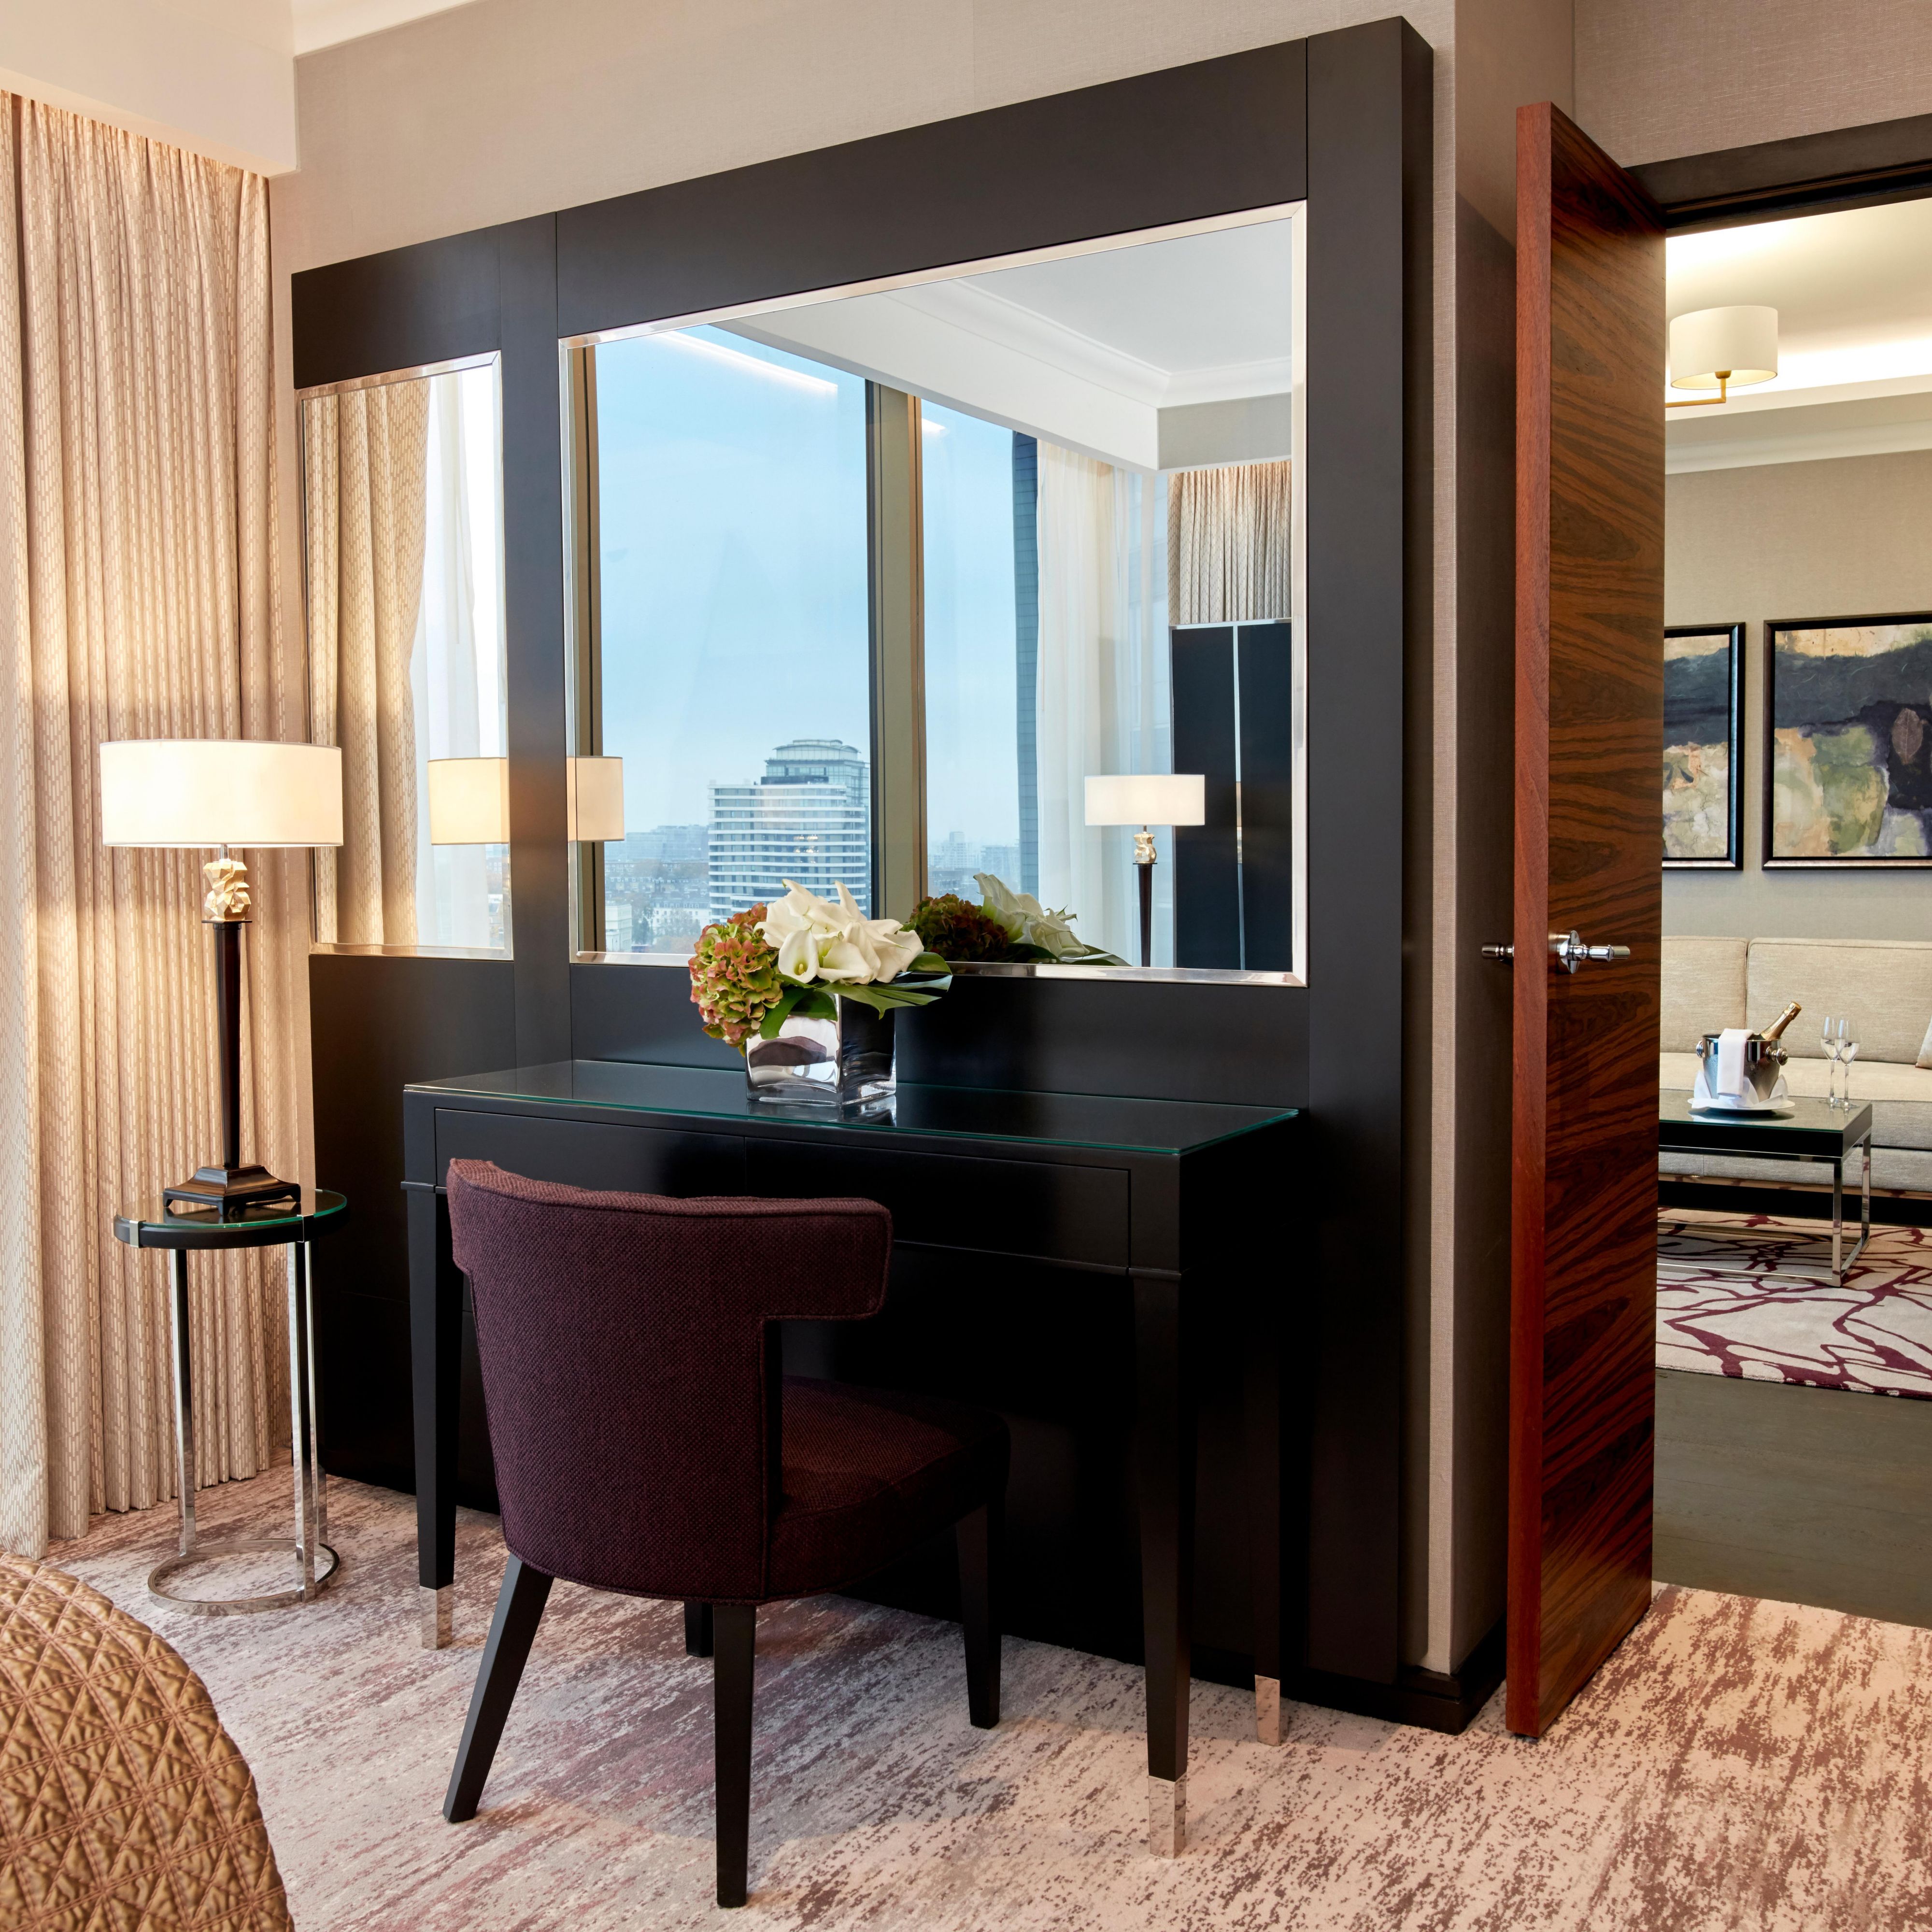 Our spacious one bedroom suites have a separate lounge area